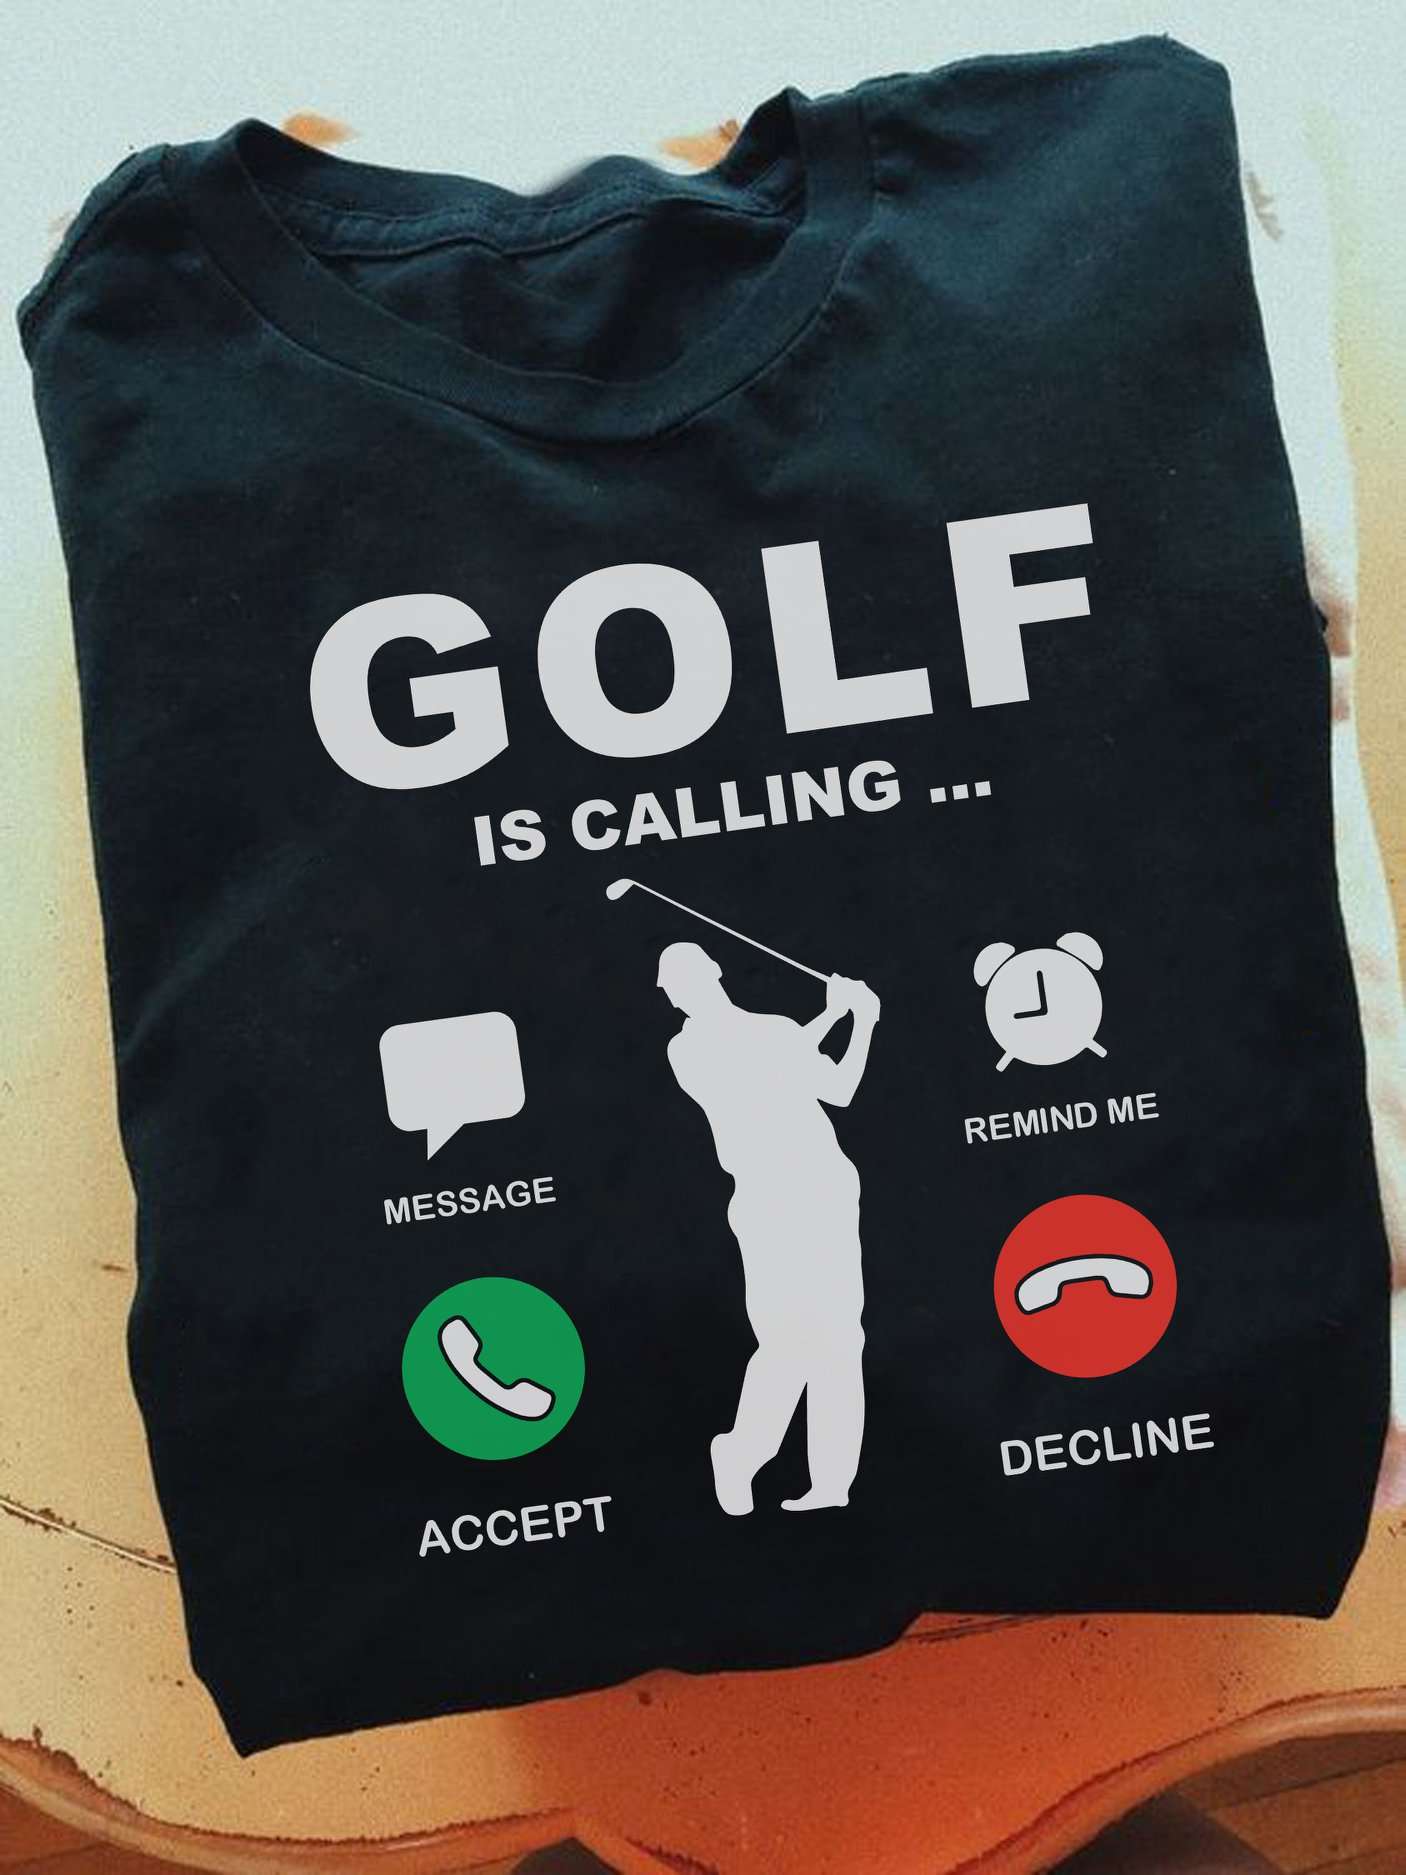 Golf is calling - Passionate golfer, golf the fancy sport